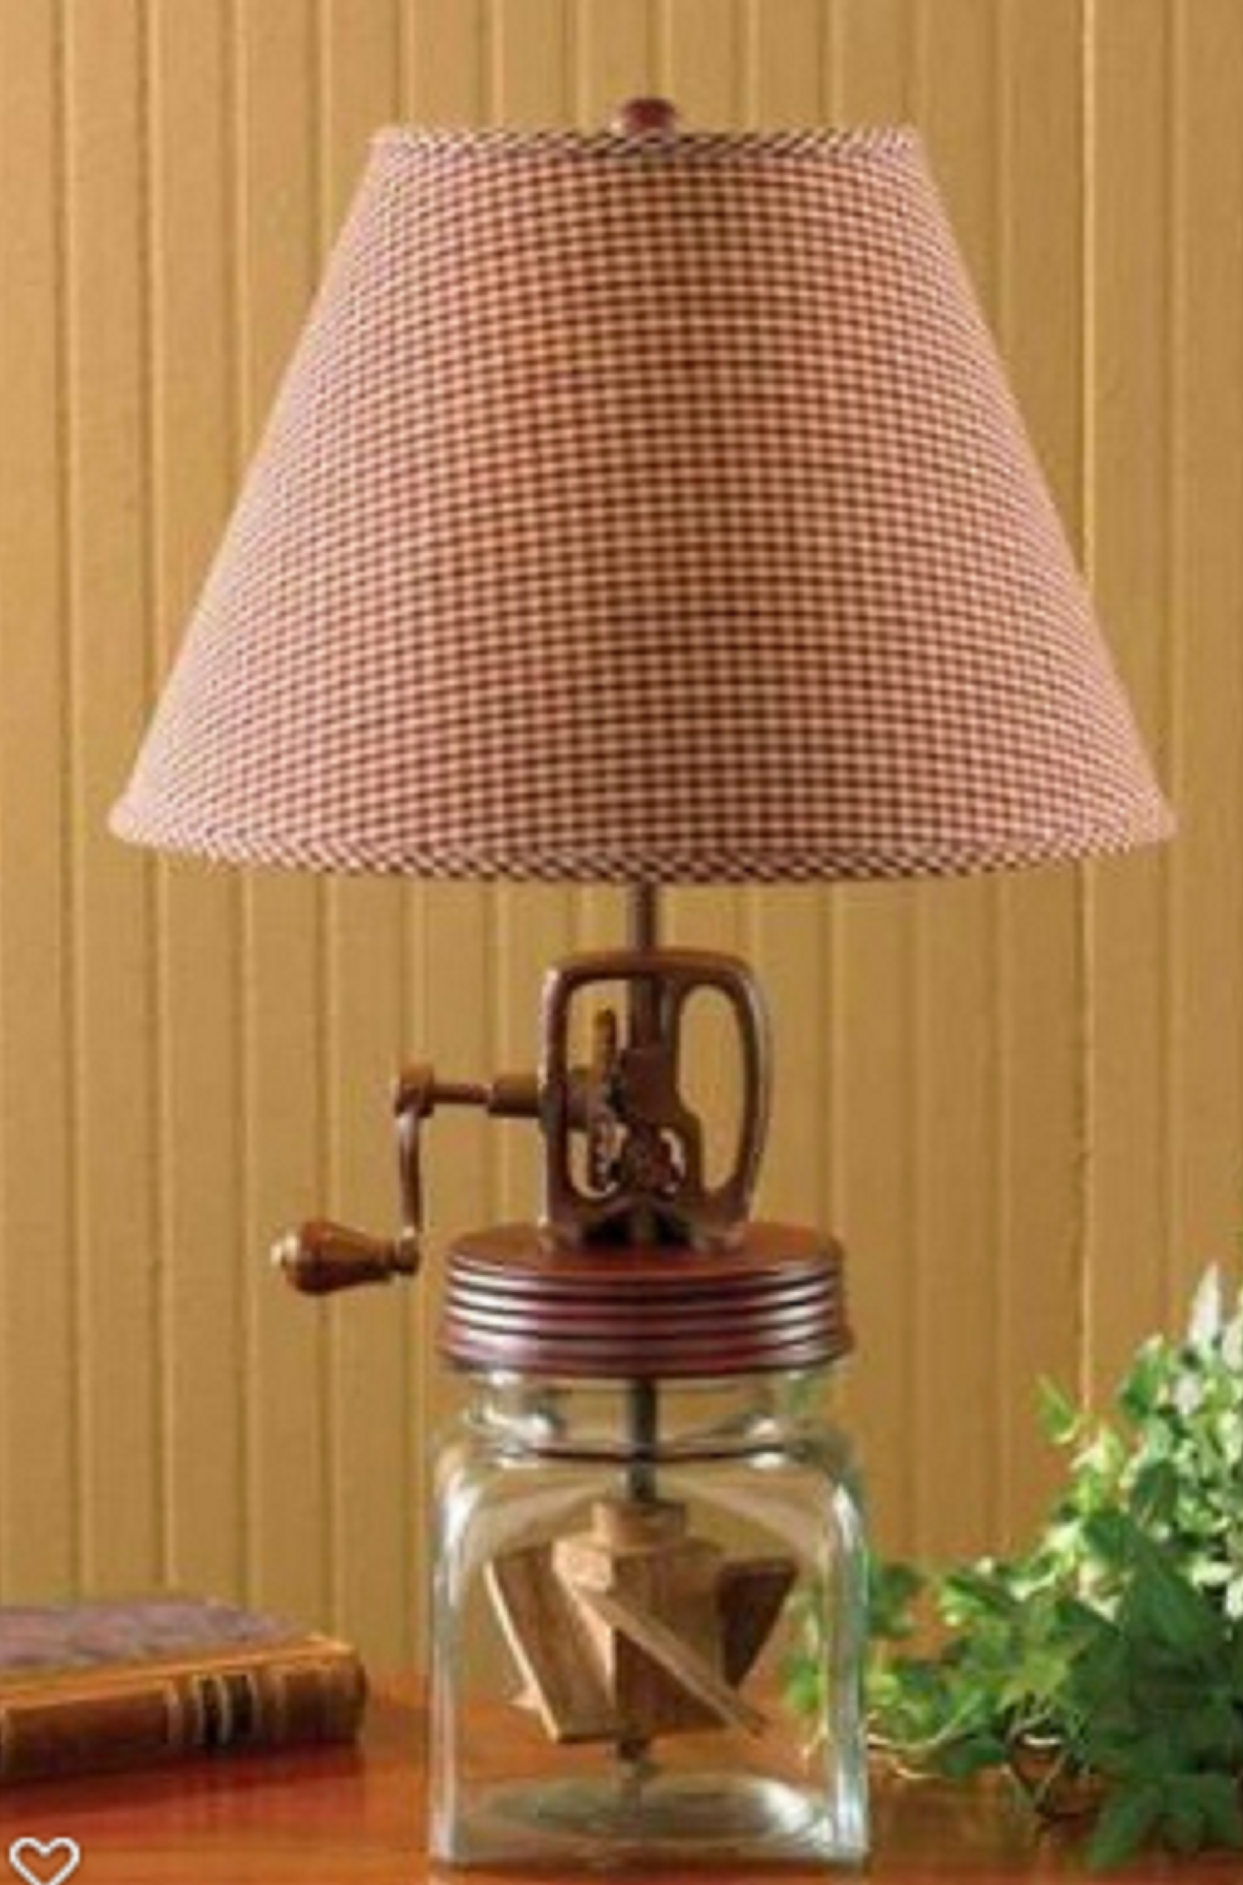 Country Farmhouse Lamp with Red Checked Shade Butter Churn Lamp Park Designs